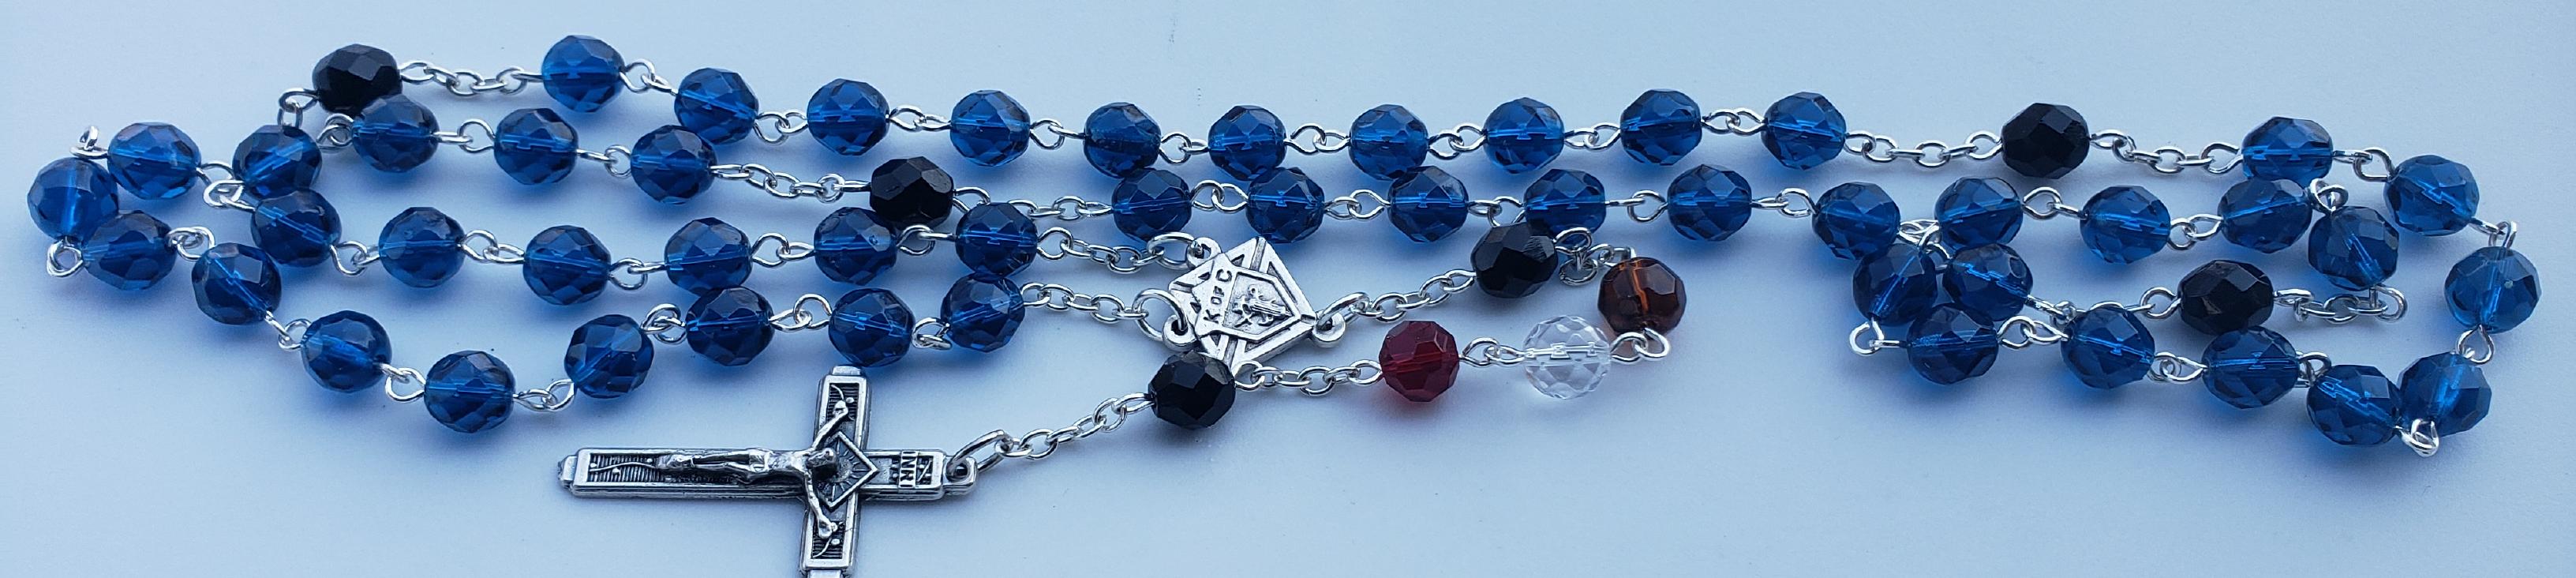 more info about rosary #50